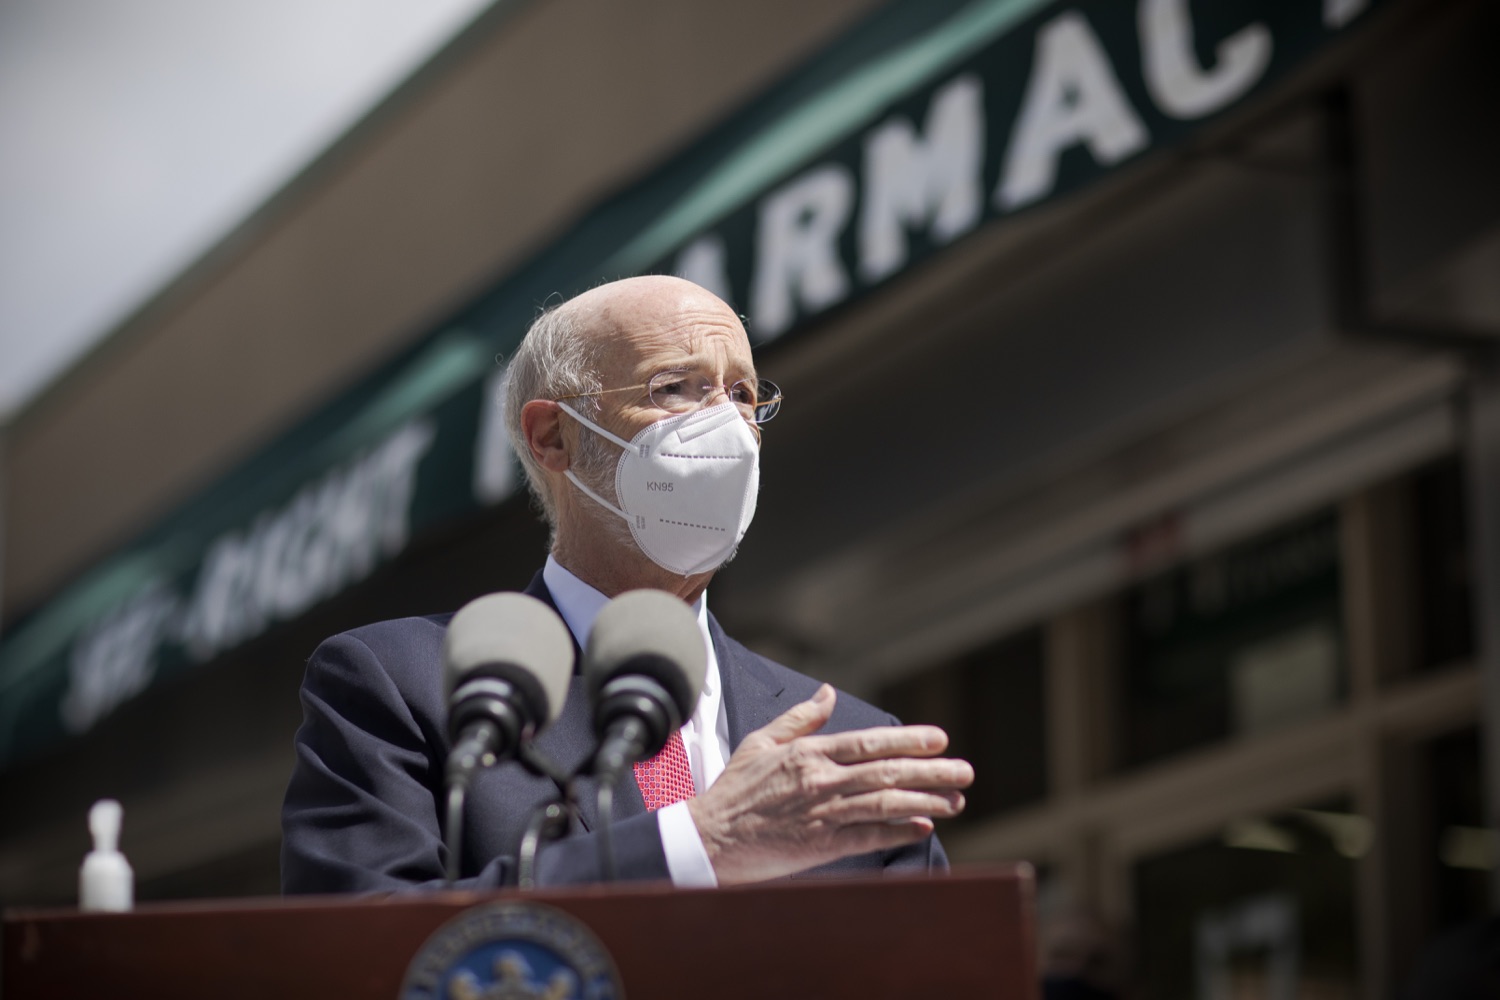 Pennsylvania Governor Tom Wolf speaking with the press.  Governor Tom Wolf today visited See-Right Pharmacy in Harrisburg to learn more about how the local, neighborhood pharmacy is vaccinating community members and to talk about COVID-19 vaccine hesitancy in Pennsylvania. Harrisburg, PA  April 22, 2021<br><a href="https://filesource.amperwave.net/commonwealthofpa/photo/18704_gov_seeRight_dz_020.jpg" target="_blank">⇣ Download Photo</a>